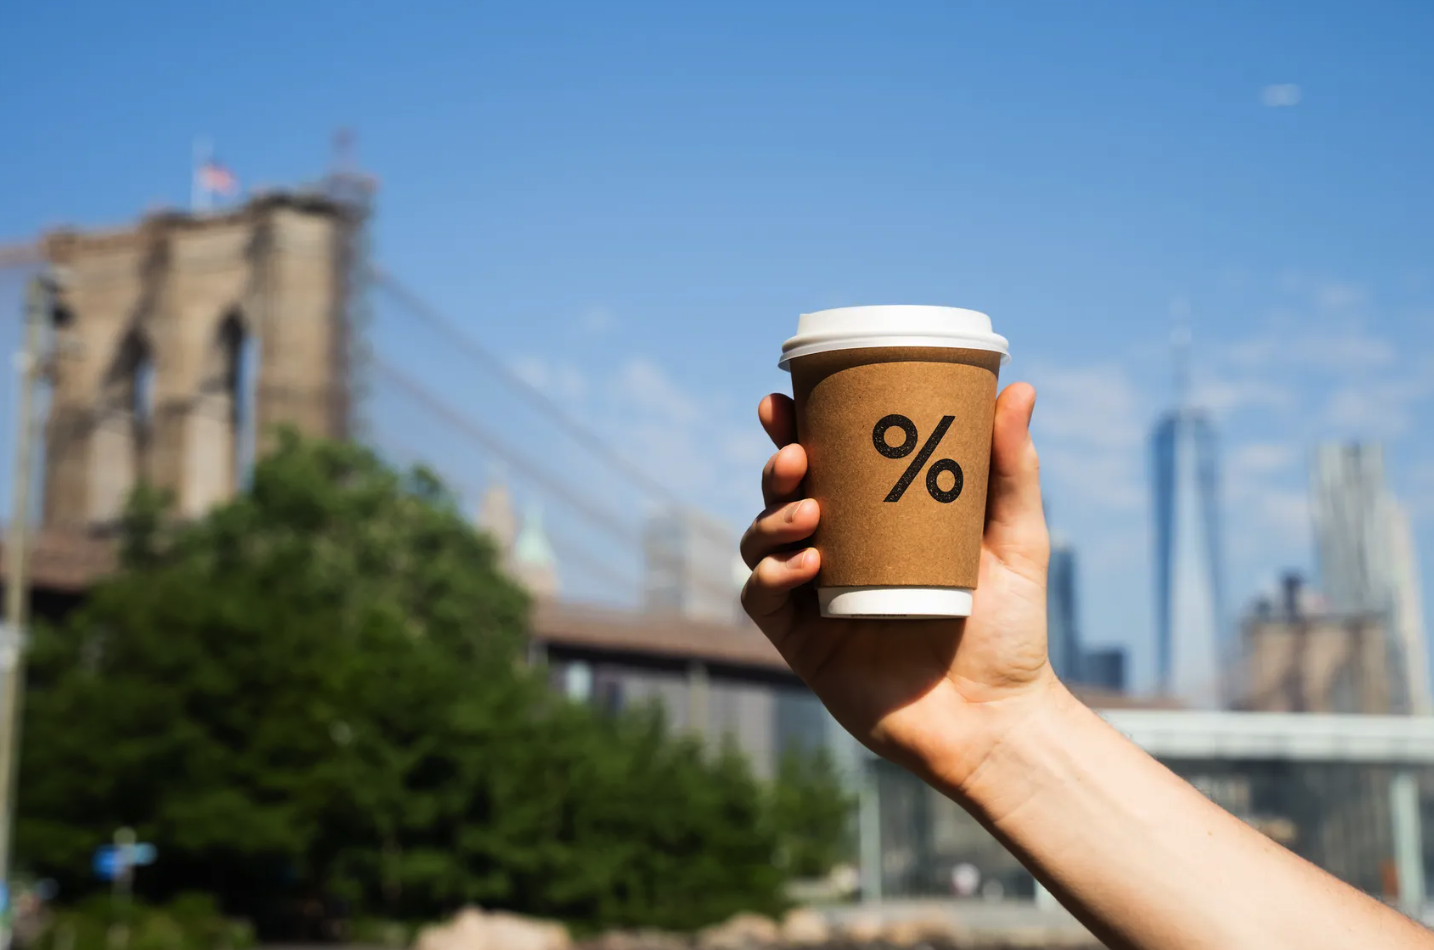 Visit % Arabica, the most Instagrammable Brooklyn café, during your Kindred home exchange. Marvel at its stunning modern design and gigantic windows framing the iconic Brooklyn Bridge and lower Manhattan skyline. Don't forget to capture the perfect travel photo to share with your friends and family.